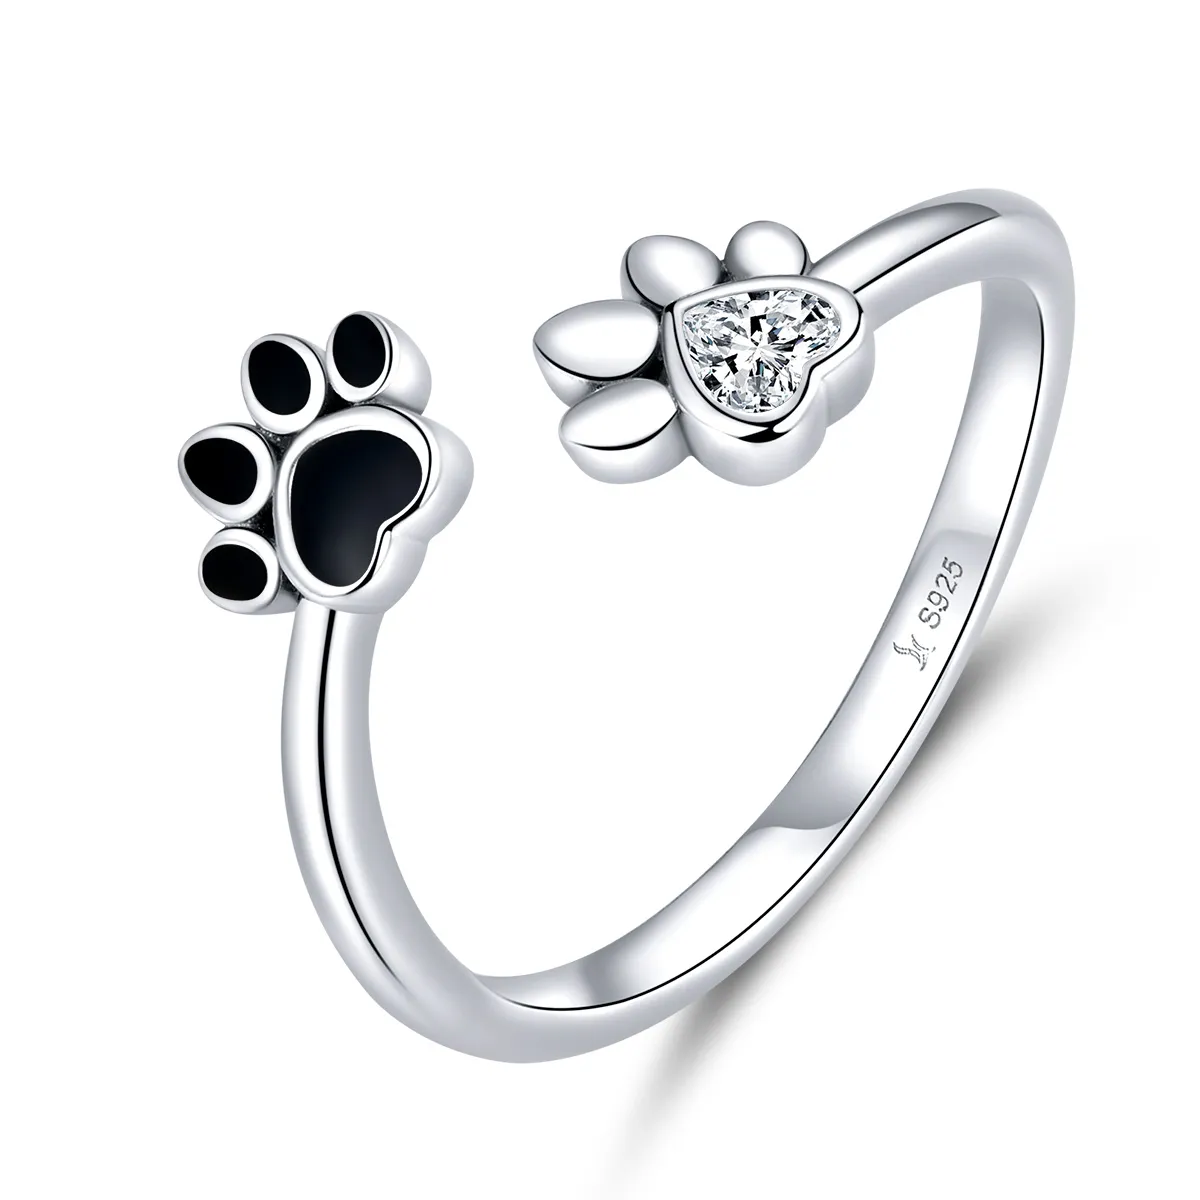 Pandora Style Silver Friendships Open Ring - SCR605